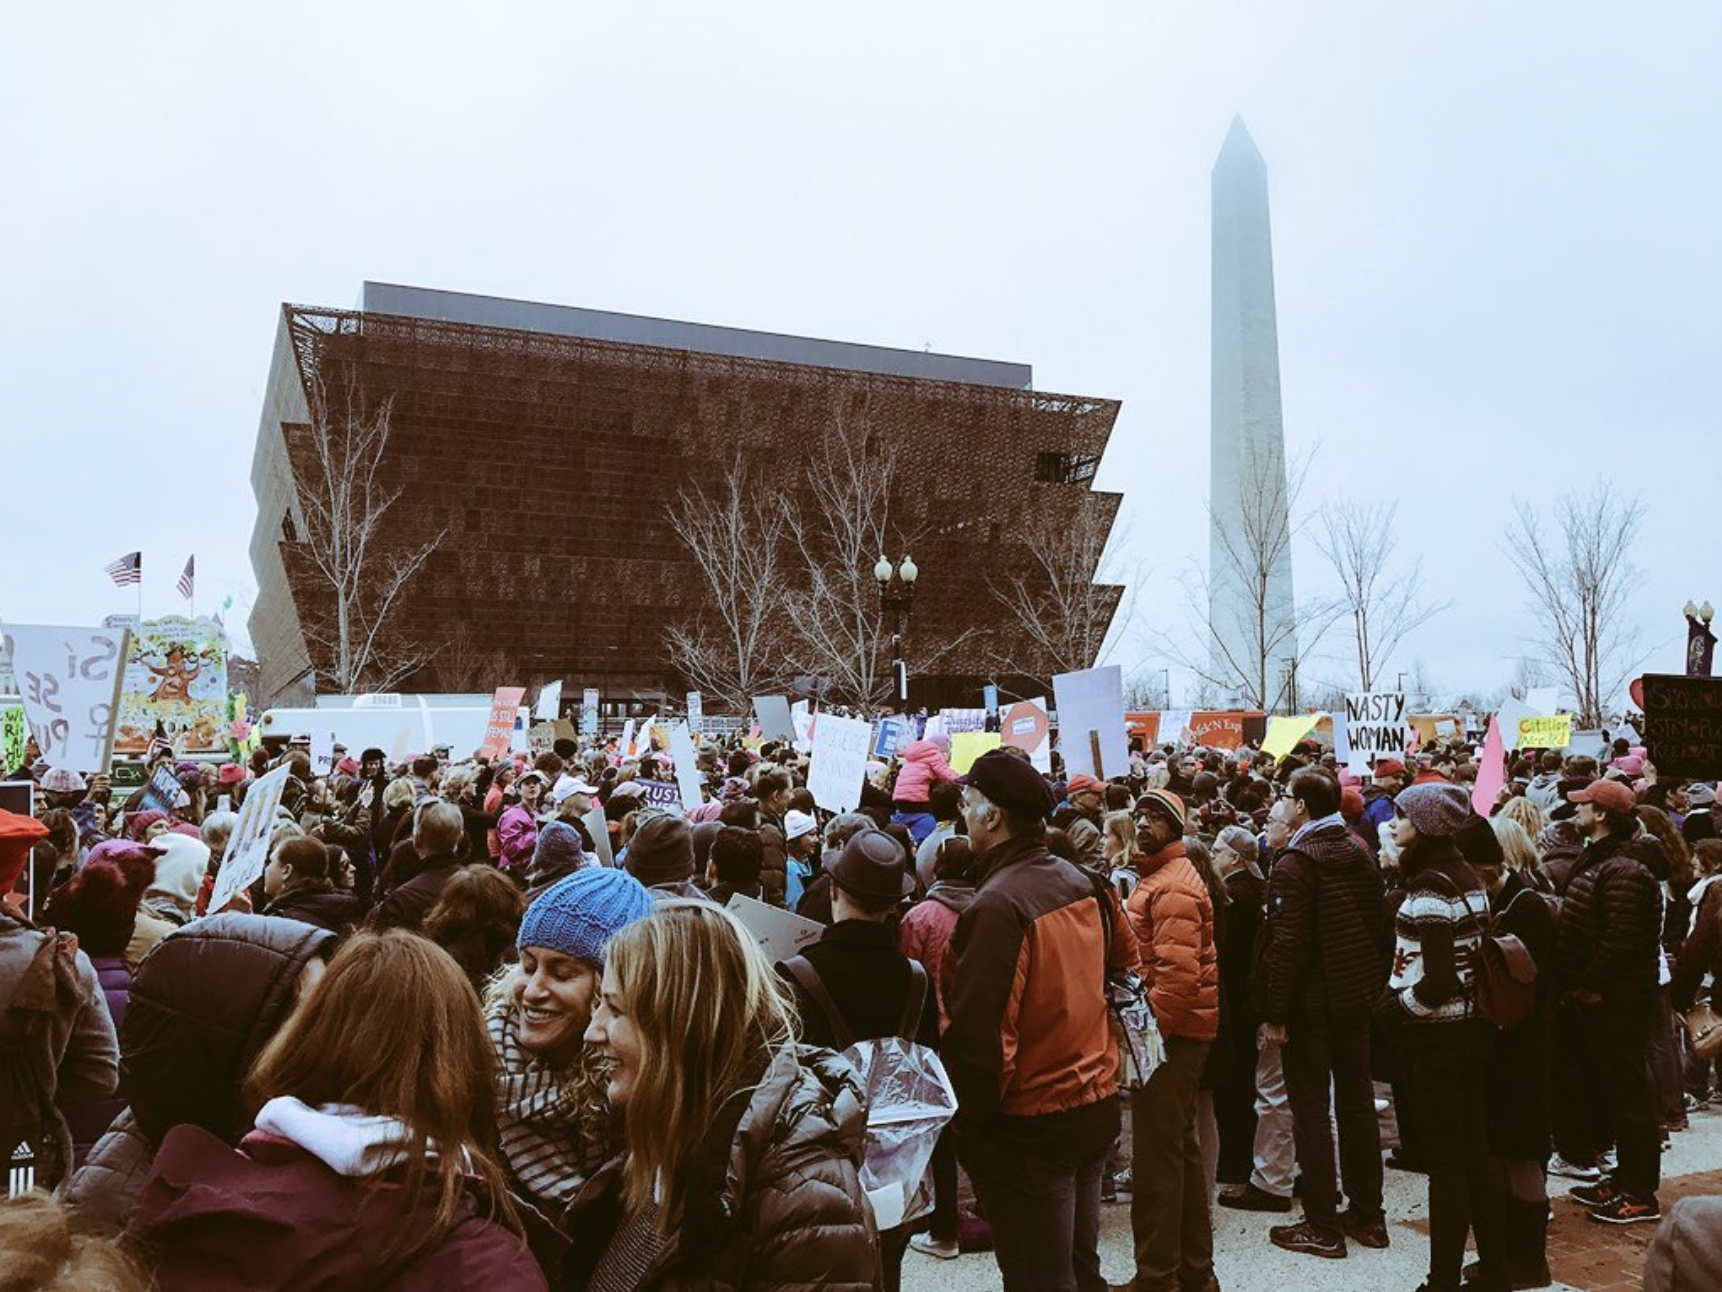 Washington, 1/21: Marchers in front of National Museum of African American History and Culture; Washington Monument in the background, the fog is everywhere